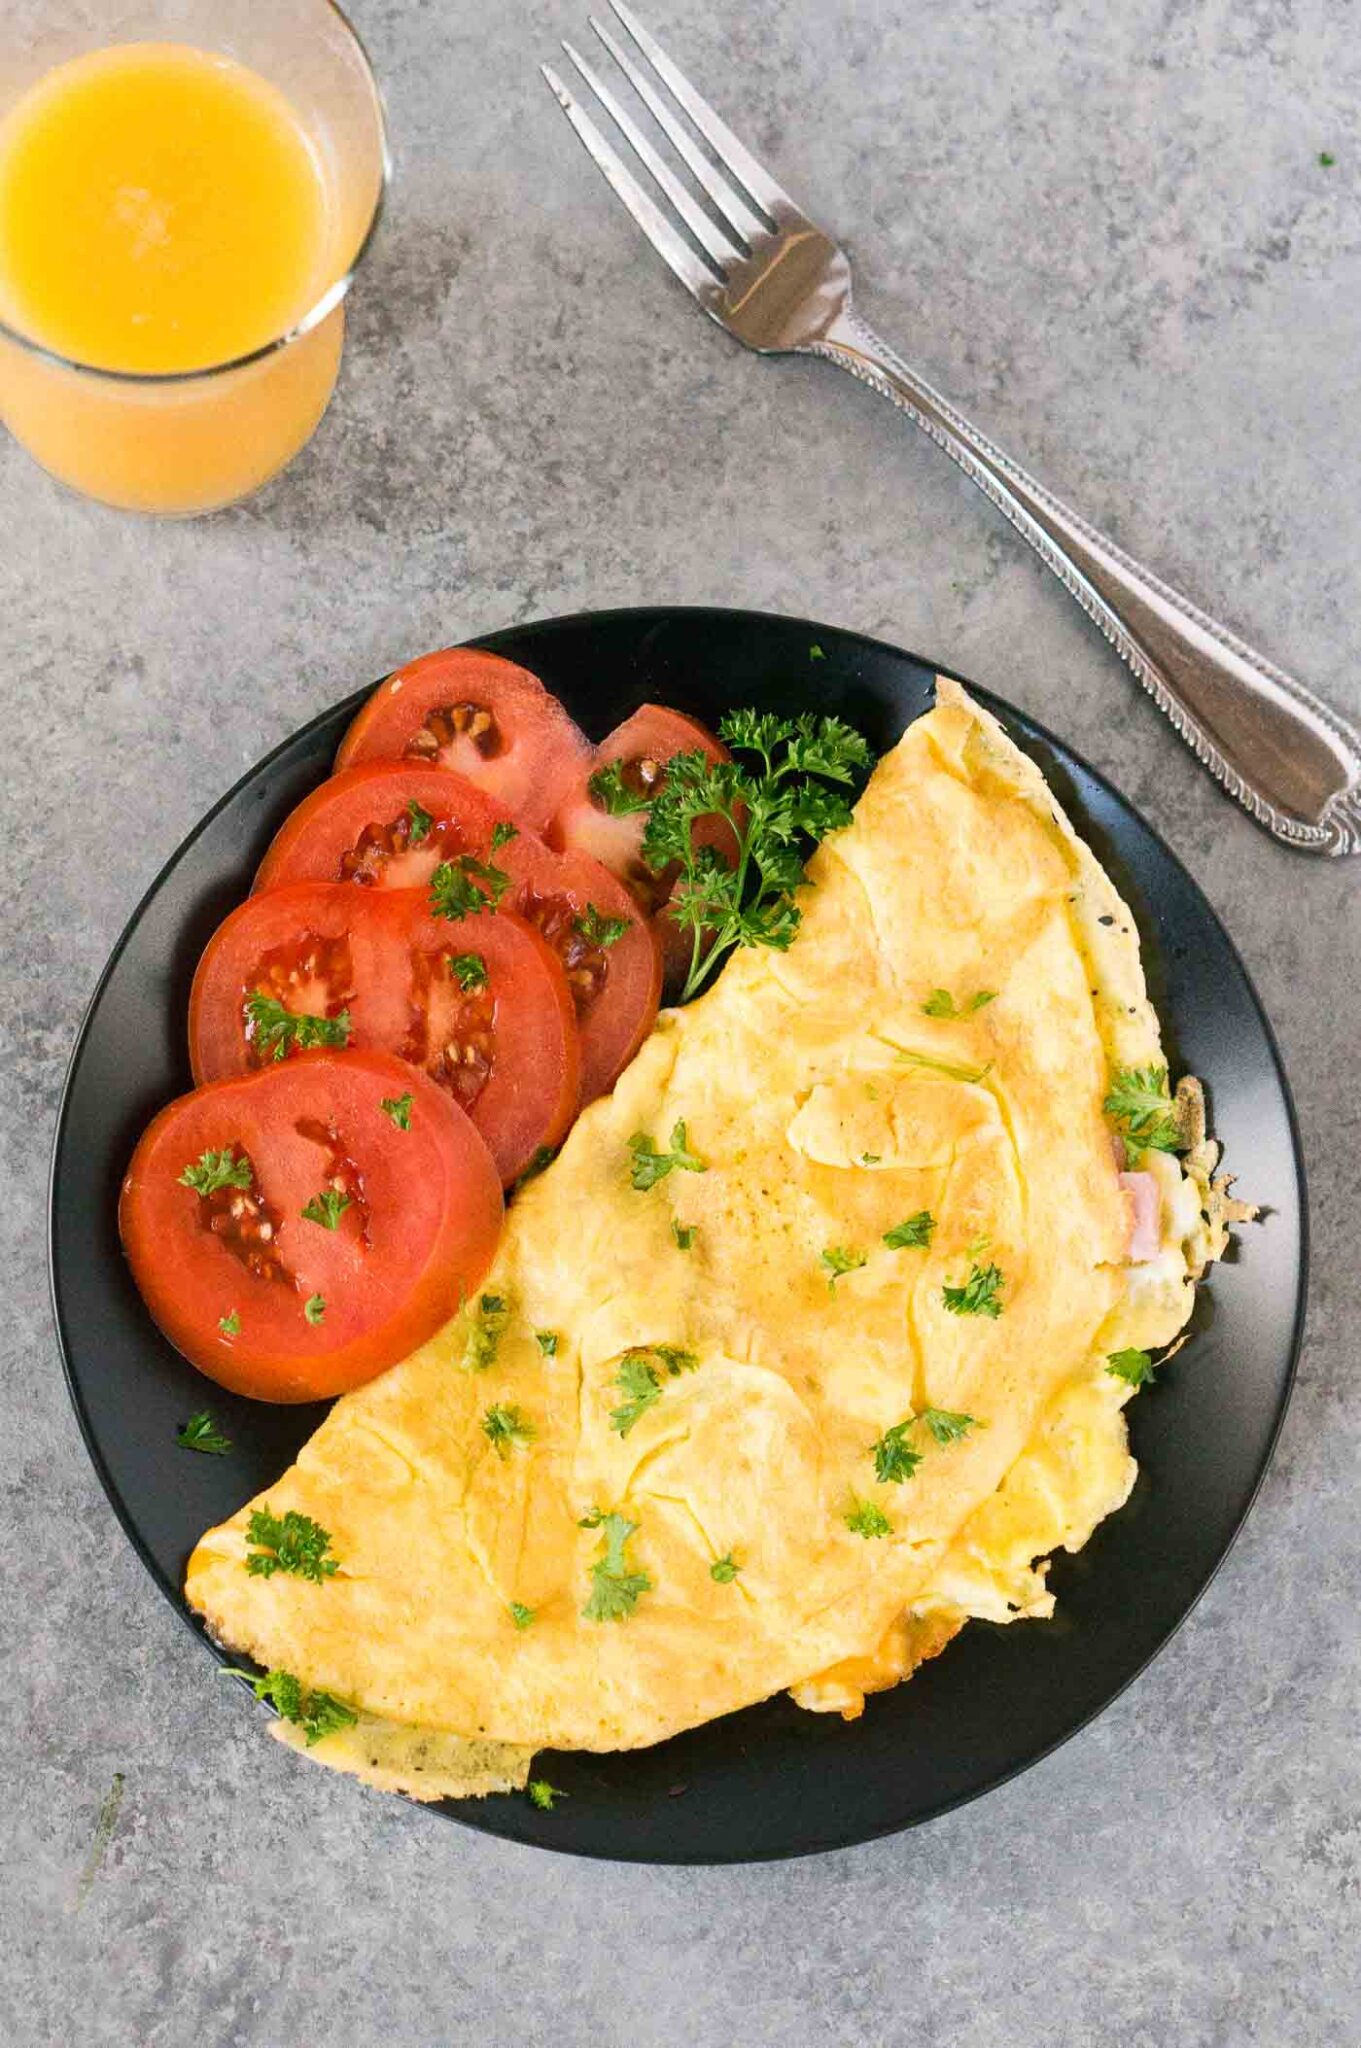 picture from top of omelet and tomato slices on a plate